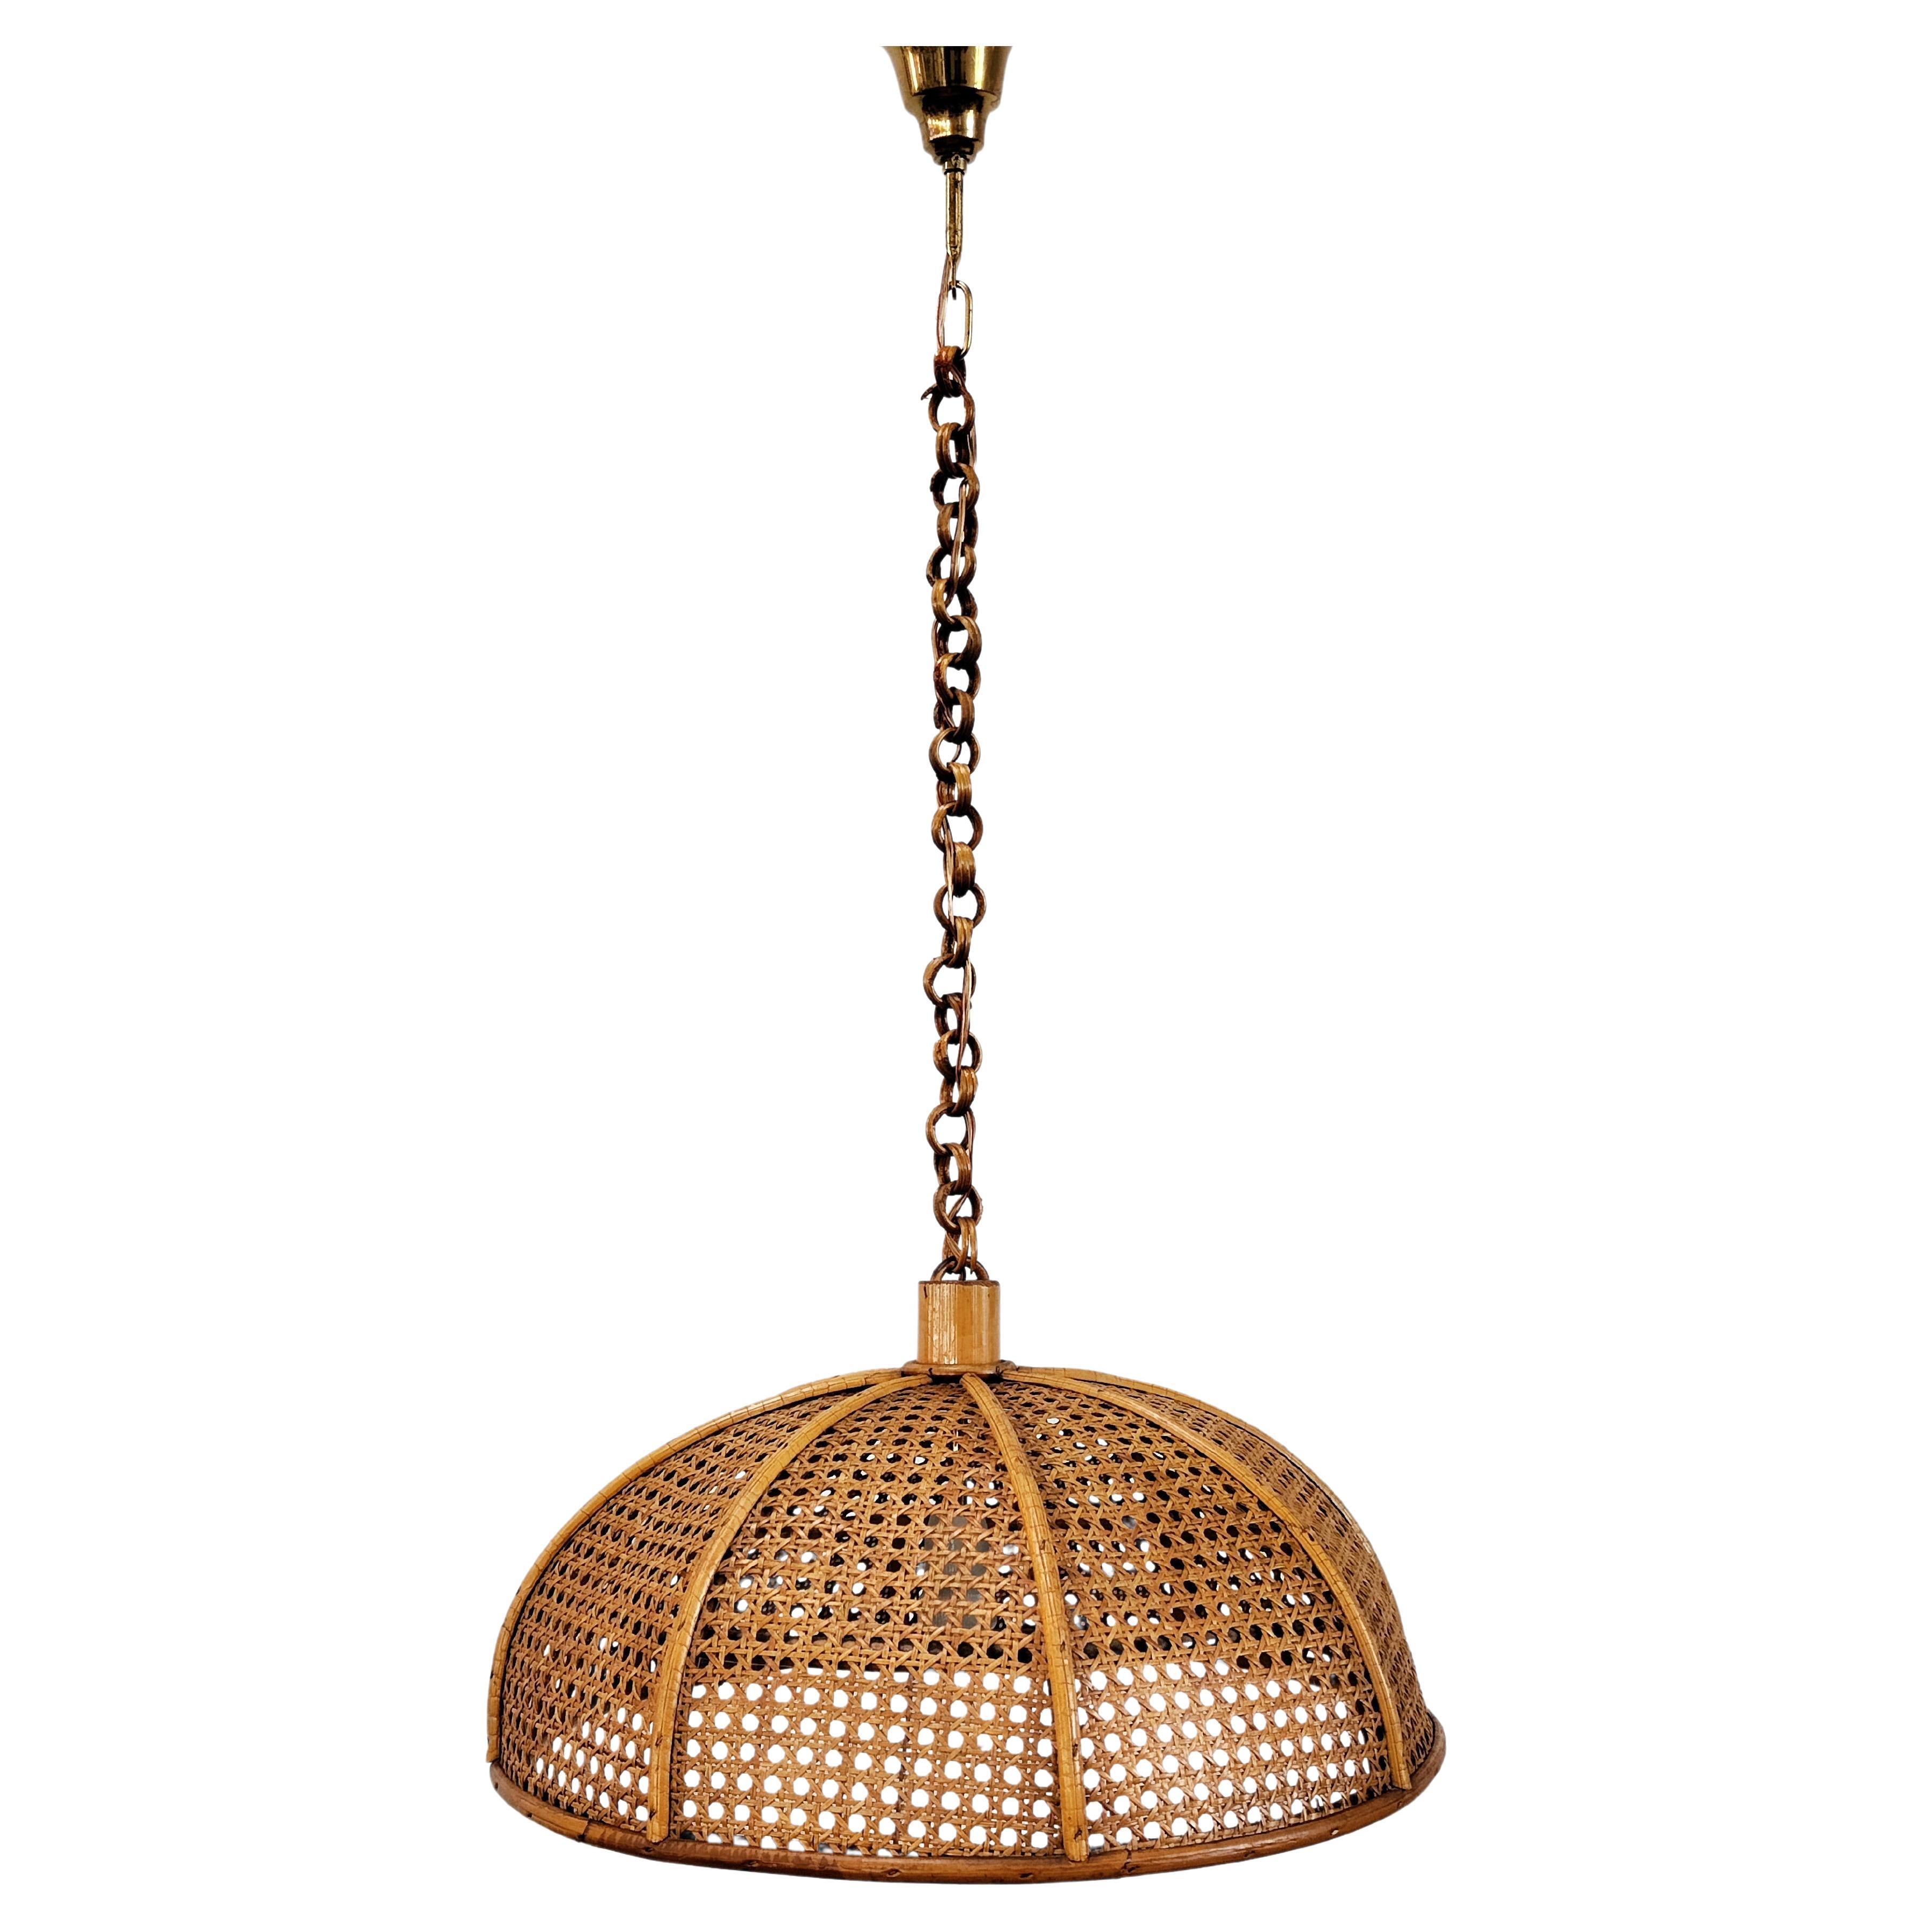 Rare Bamboo and Rattan / Cane Pendant Light, Italy, 1950s